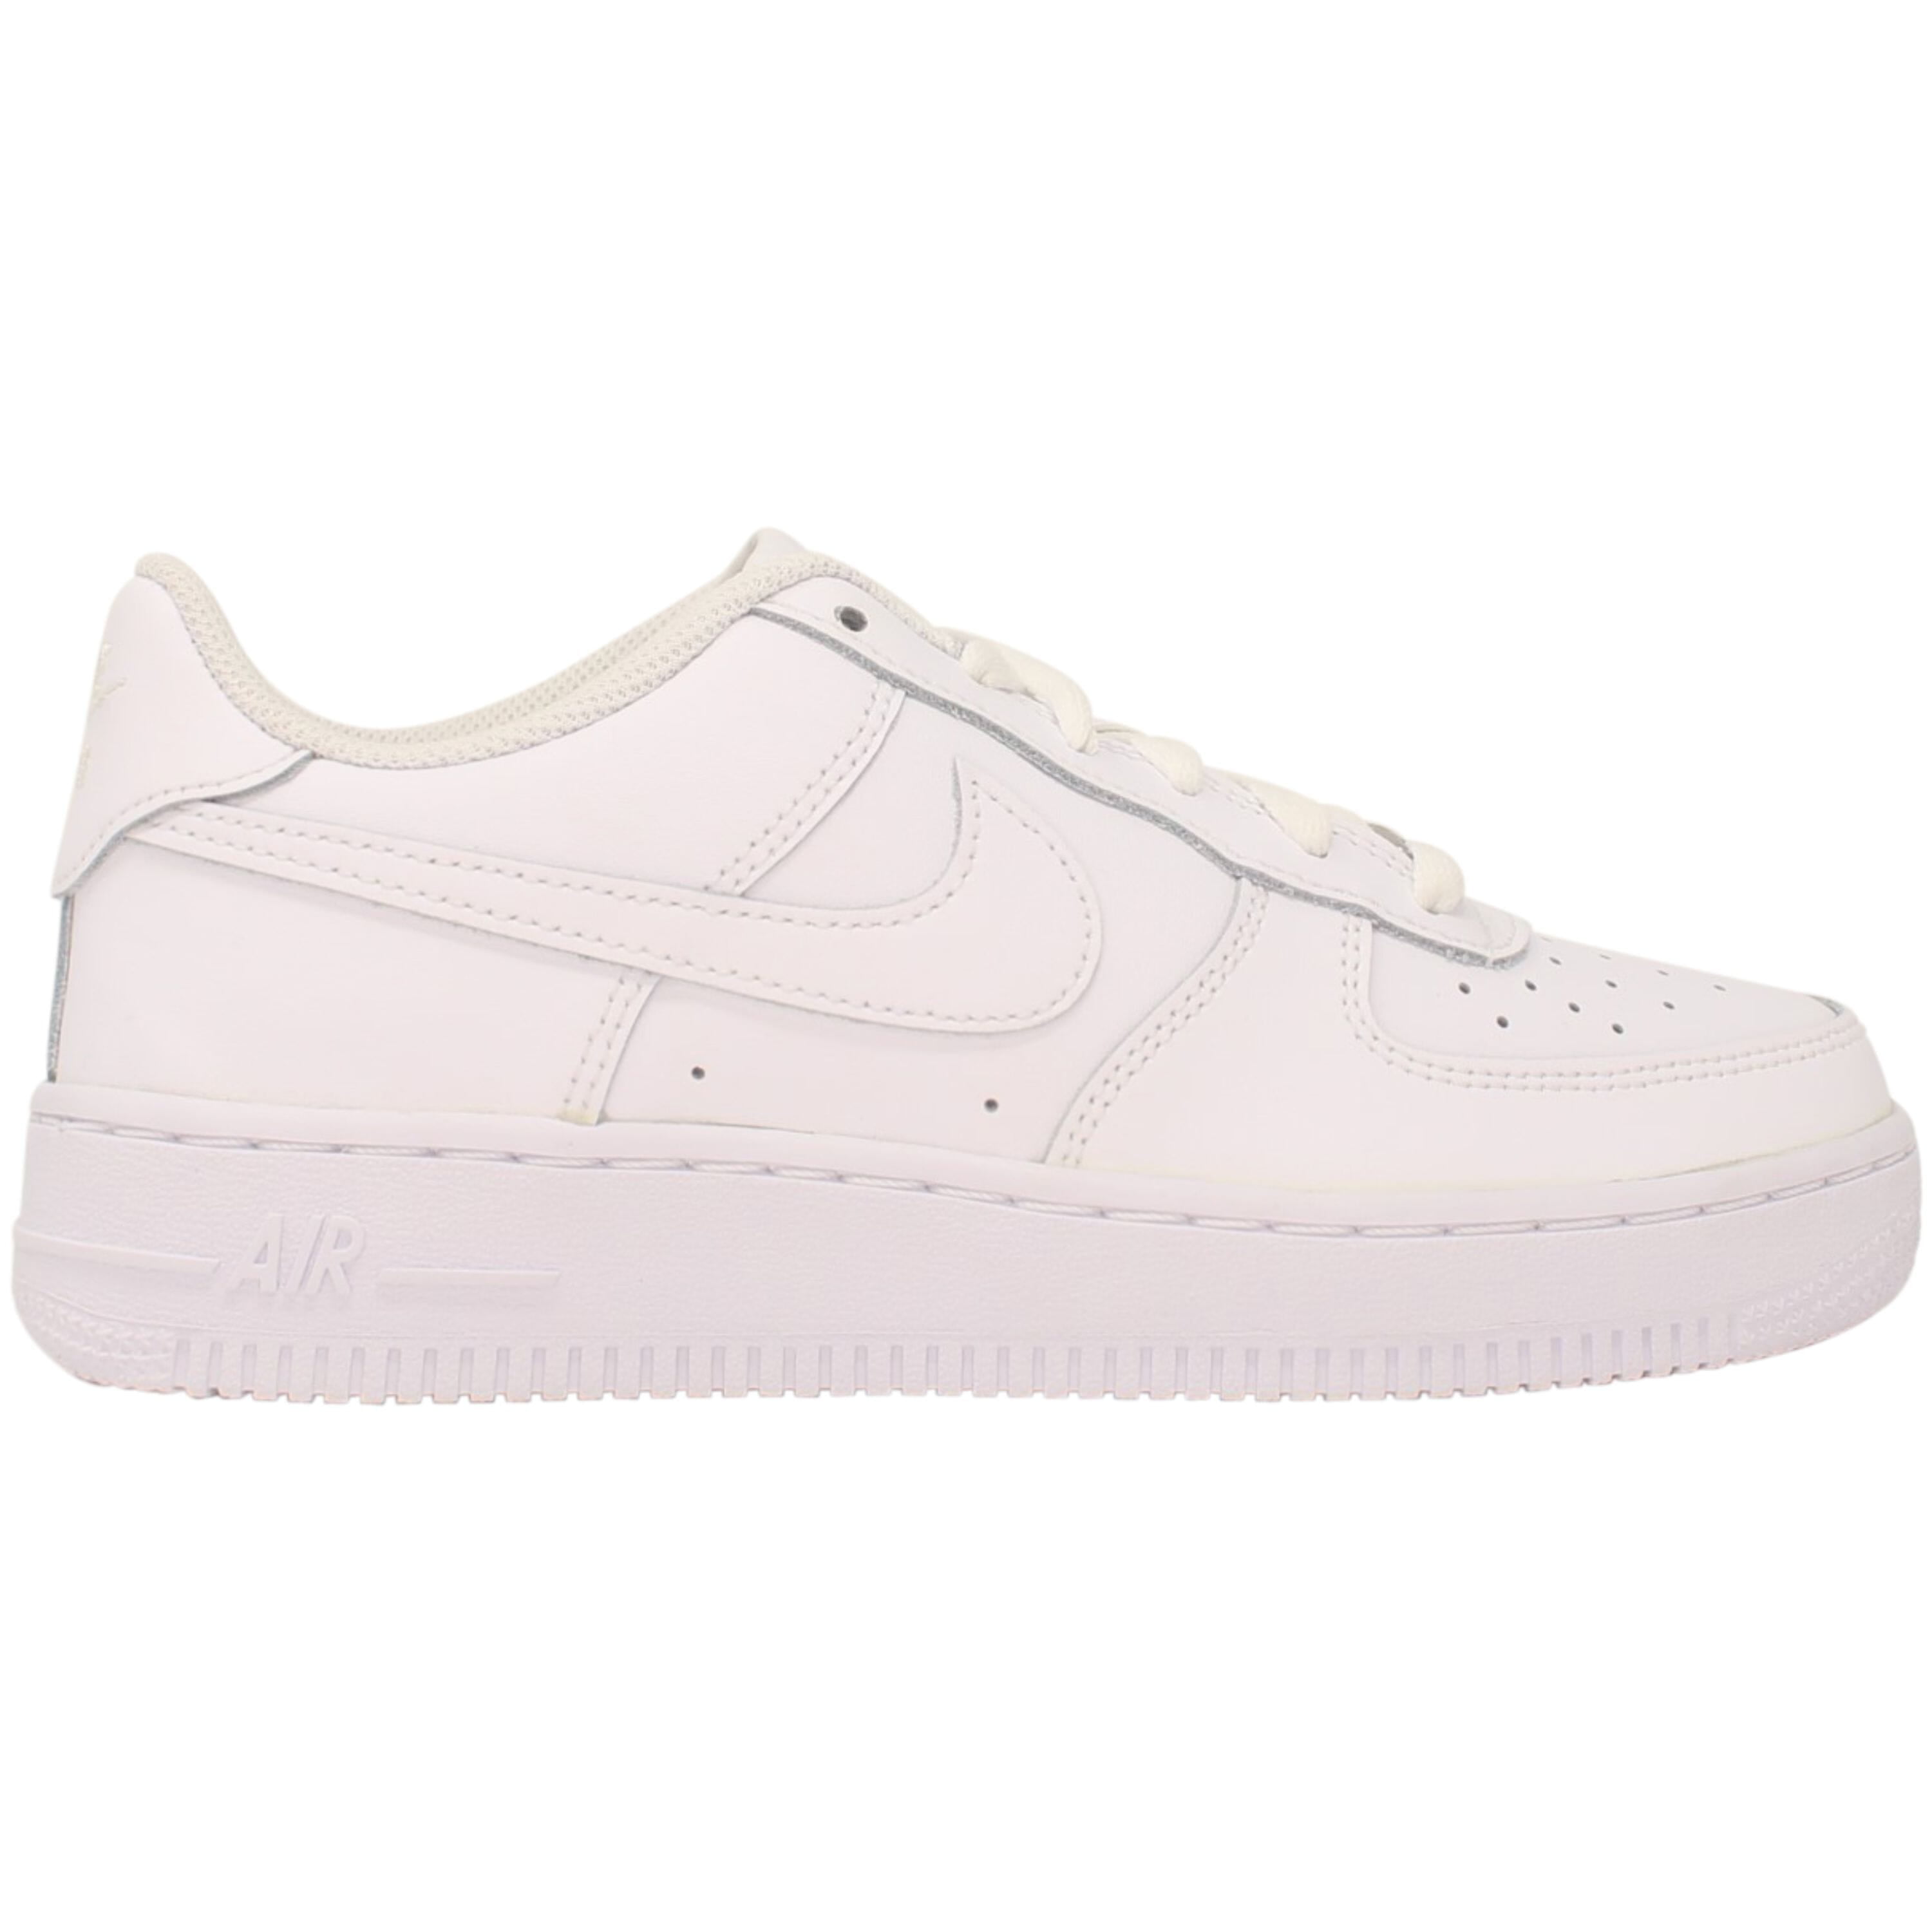 010 - air max command nike white pants shoes - LV x Nike Air Force 1 07 Low  Navy Blue Brown White 315122 - RvceShops